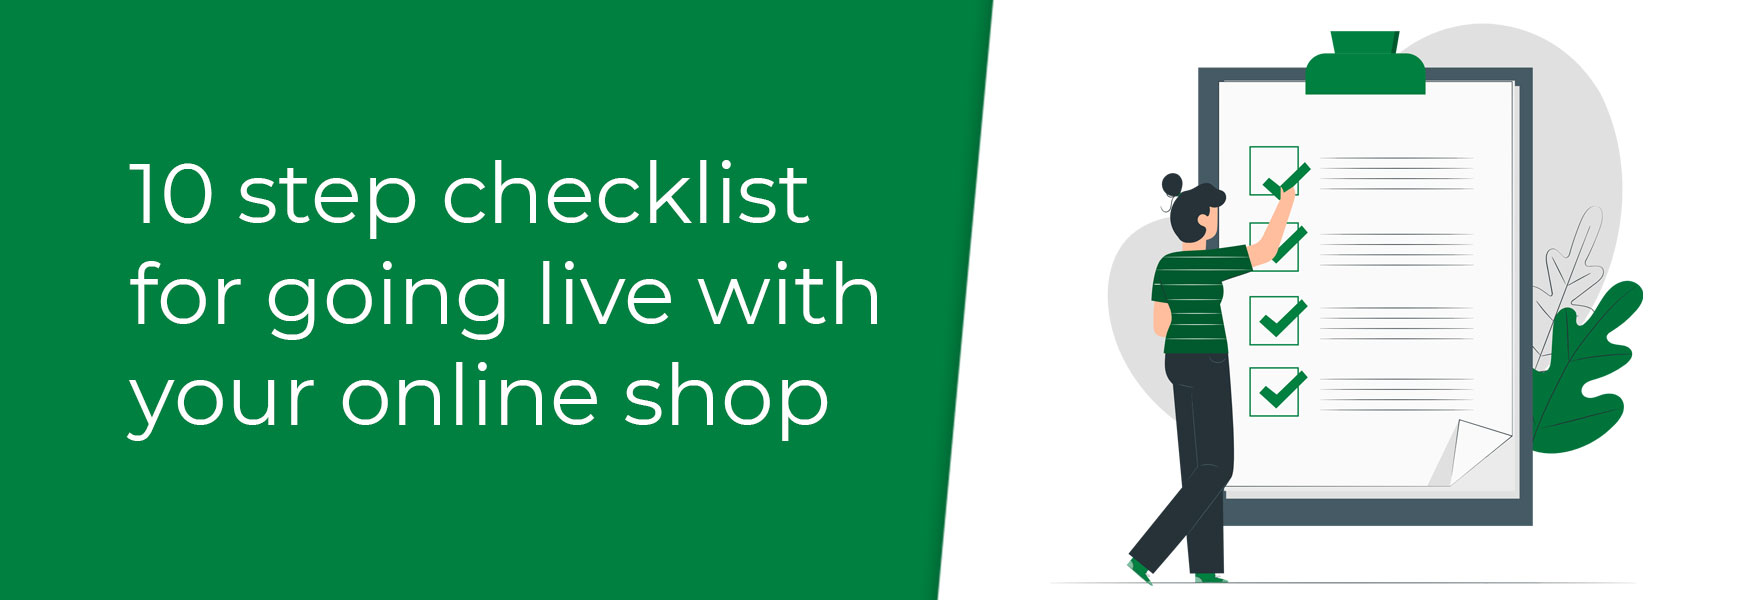 10 step checklist for going live with your online shop